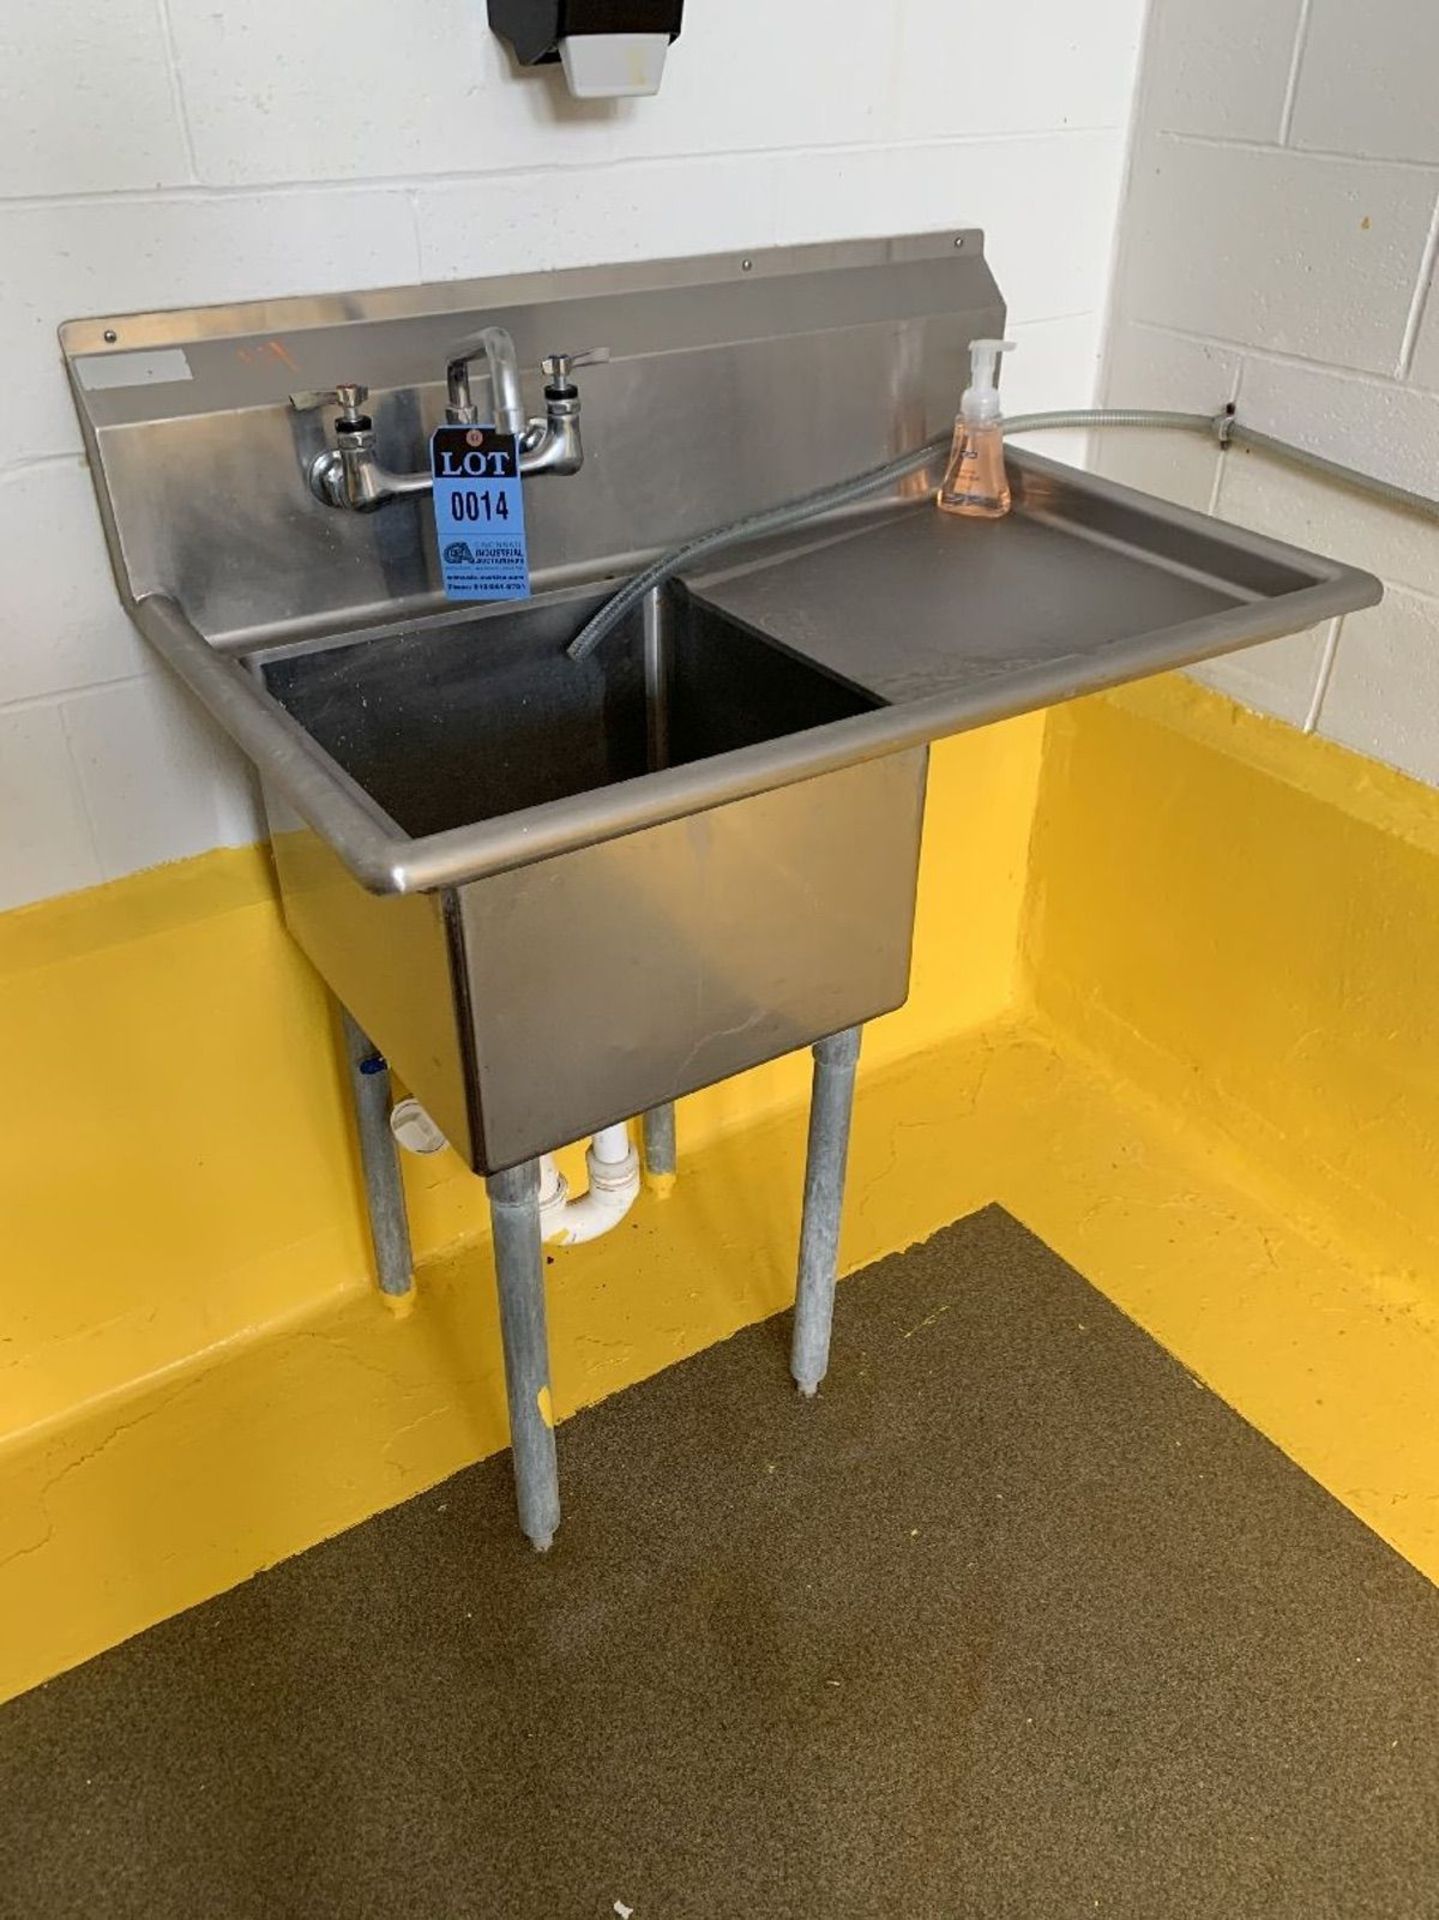 SINK 24" X 40" X 36" HIGH STAINLESS STEEL SINGLE BOWL SINK | Rig Fee: $75